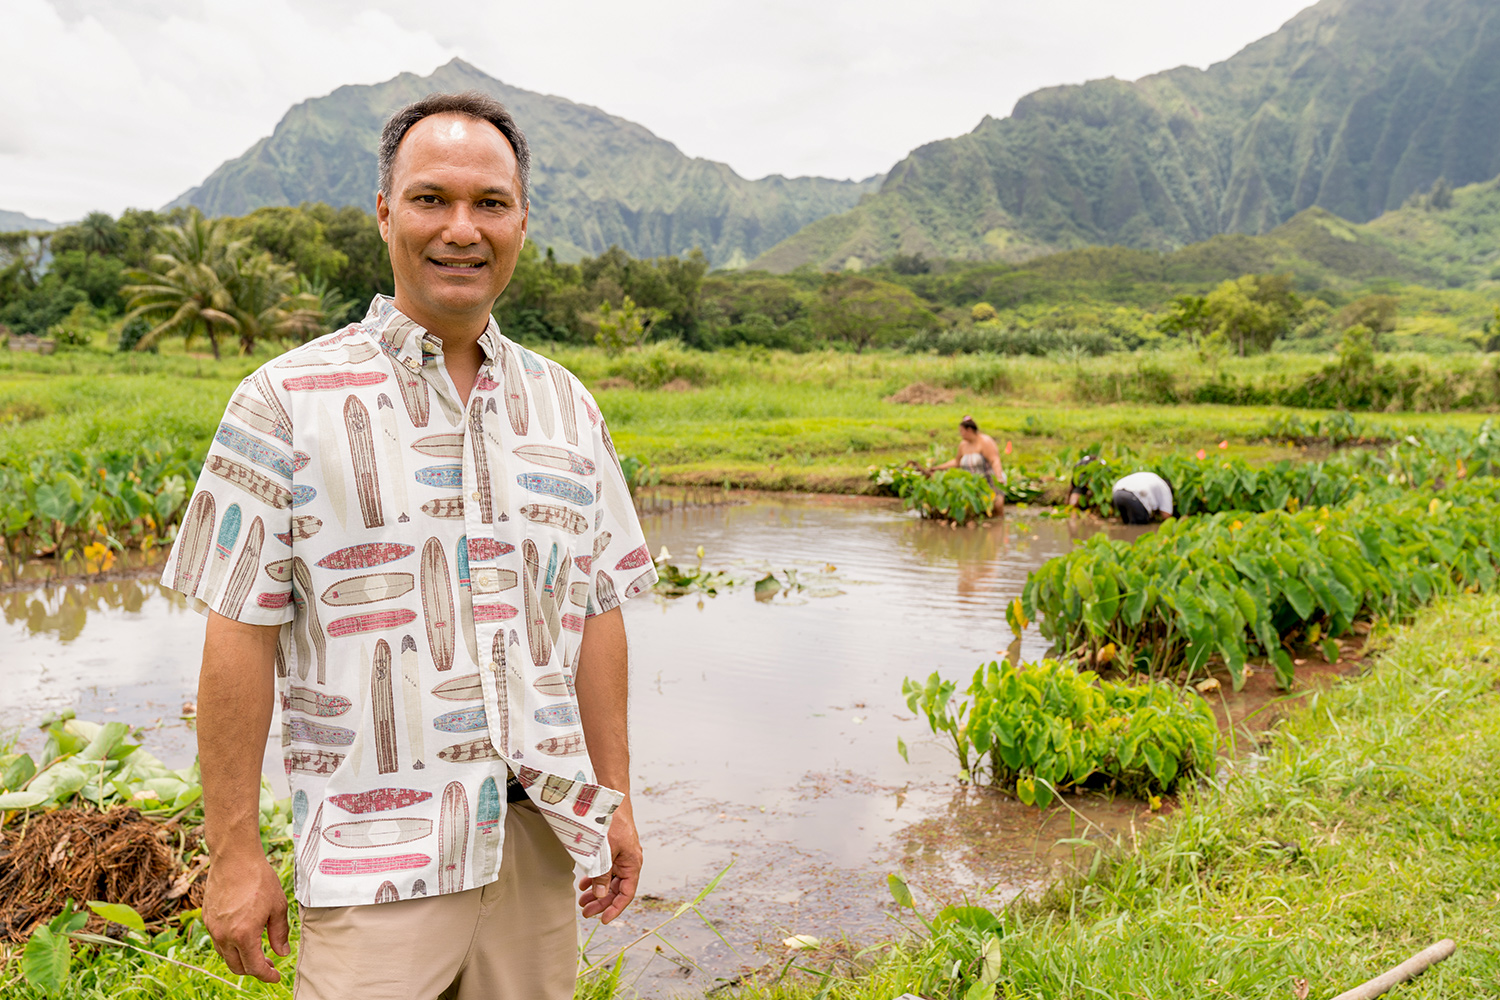 A man stands in front of an aquatically-cultured taro field in Hawaii with mountains in the background